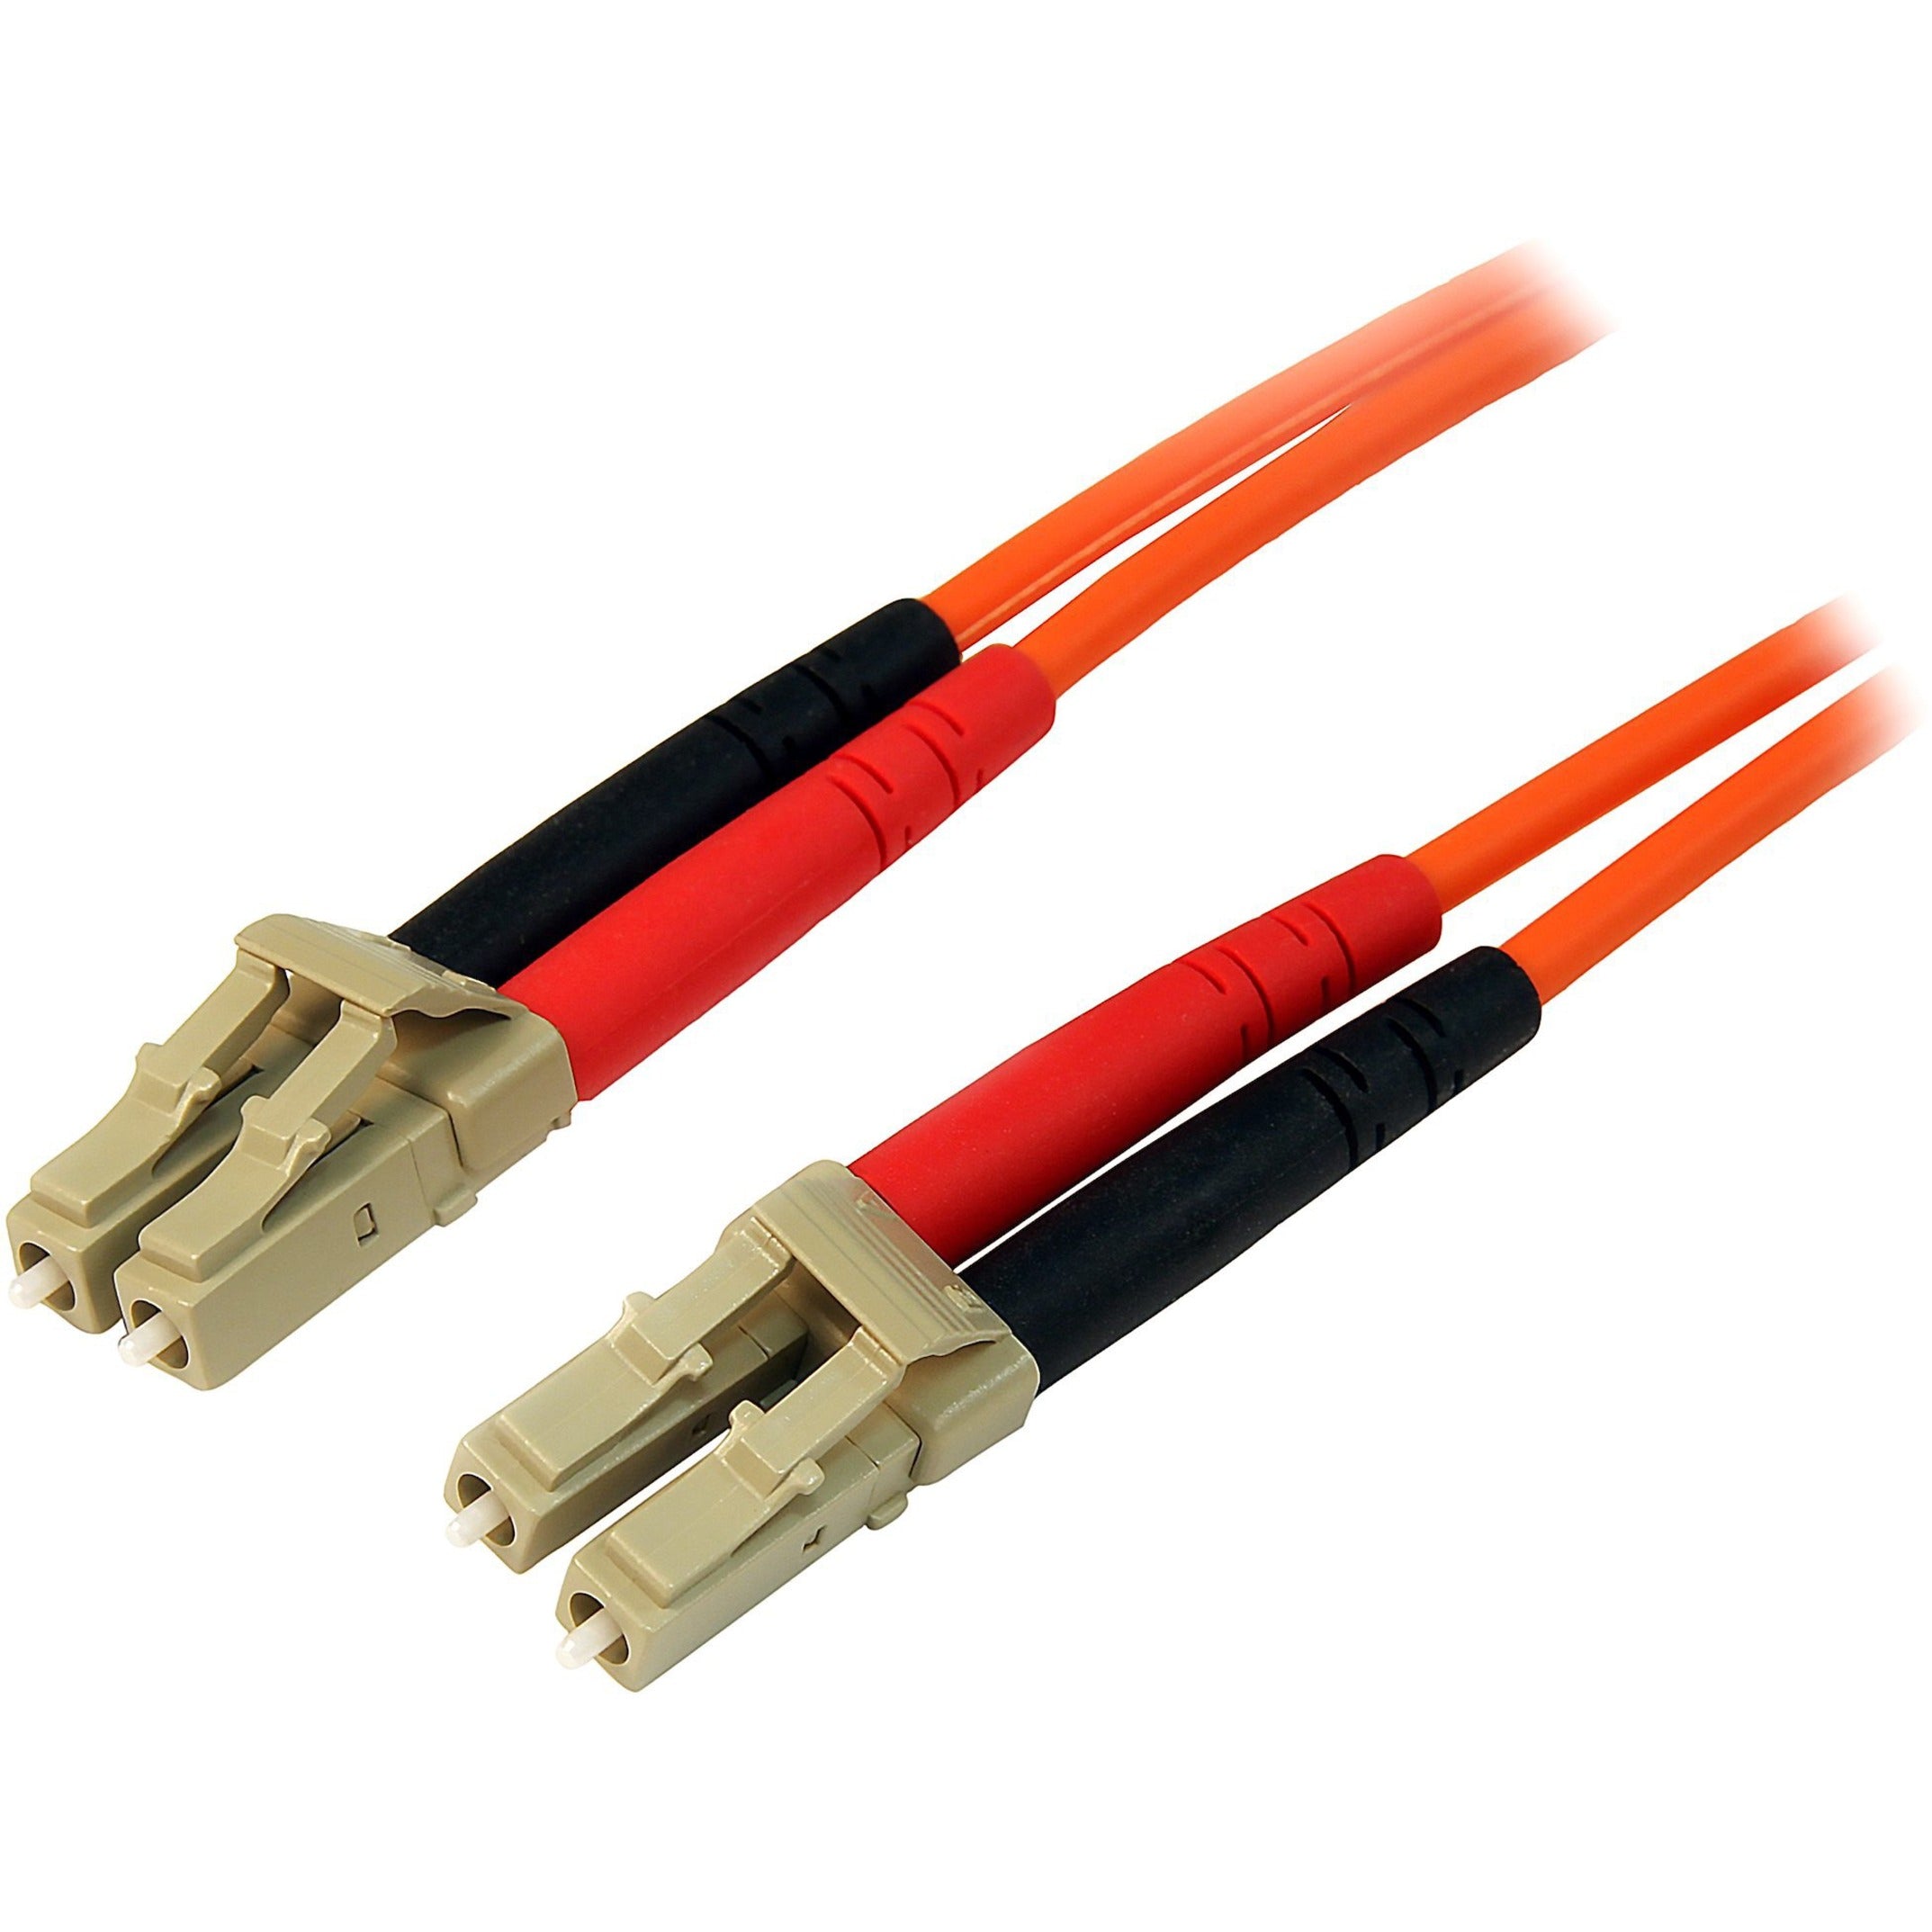 StarTech.com 50FIBLCLC10 10m Multimode 50/125 Duplex Fiber Patch Cable LC - LC, Immune to electric interference, Greater durability during cable installation and maintenance, RoHS Certified